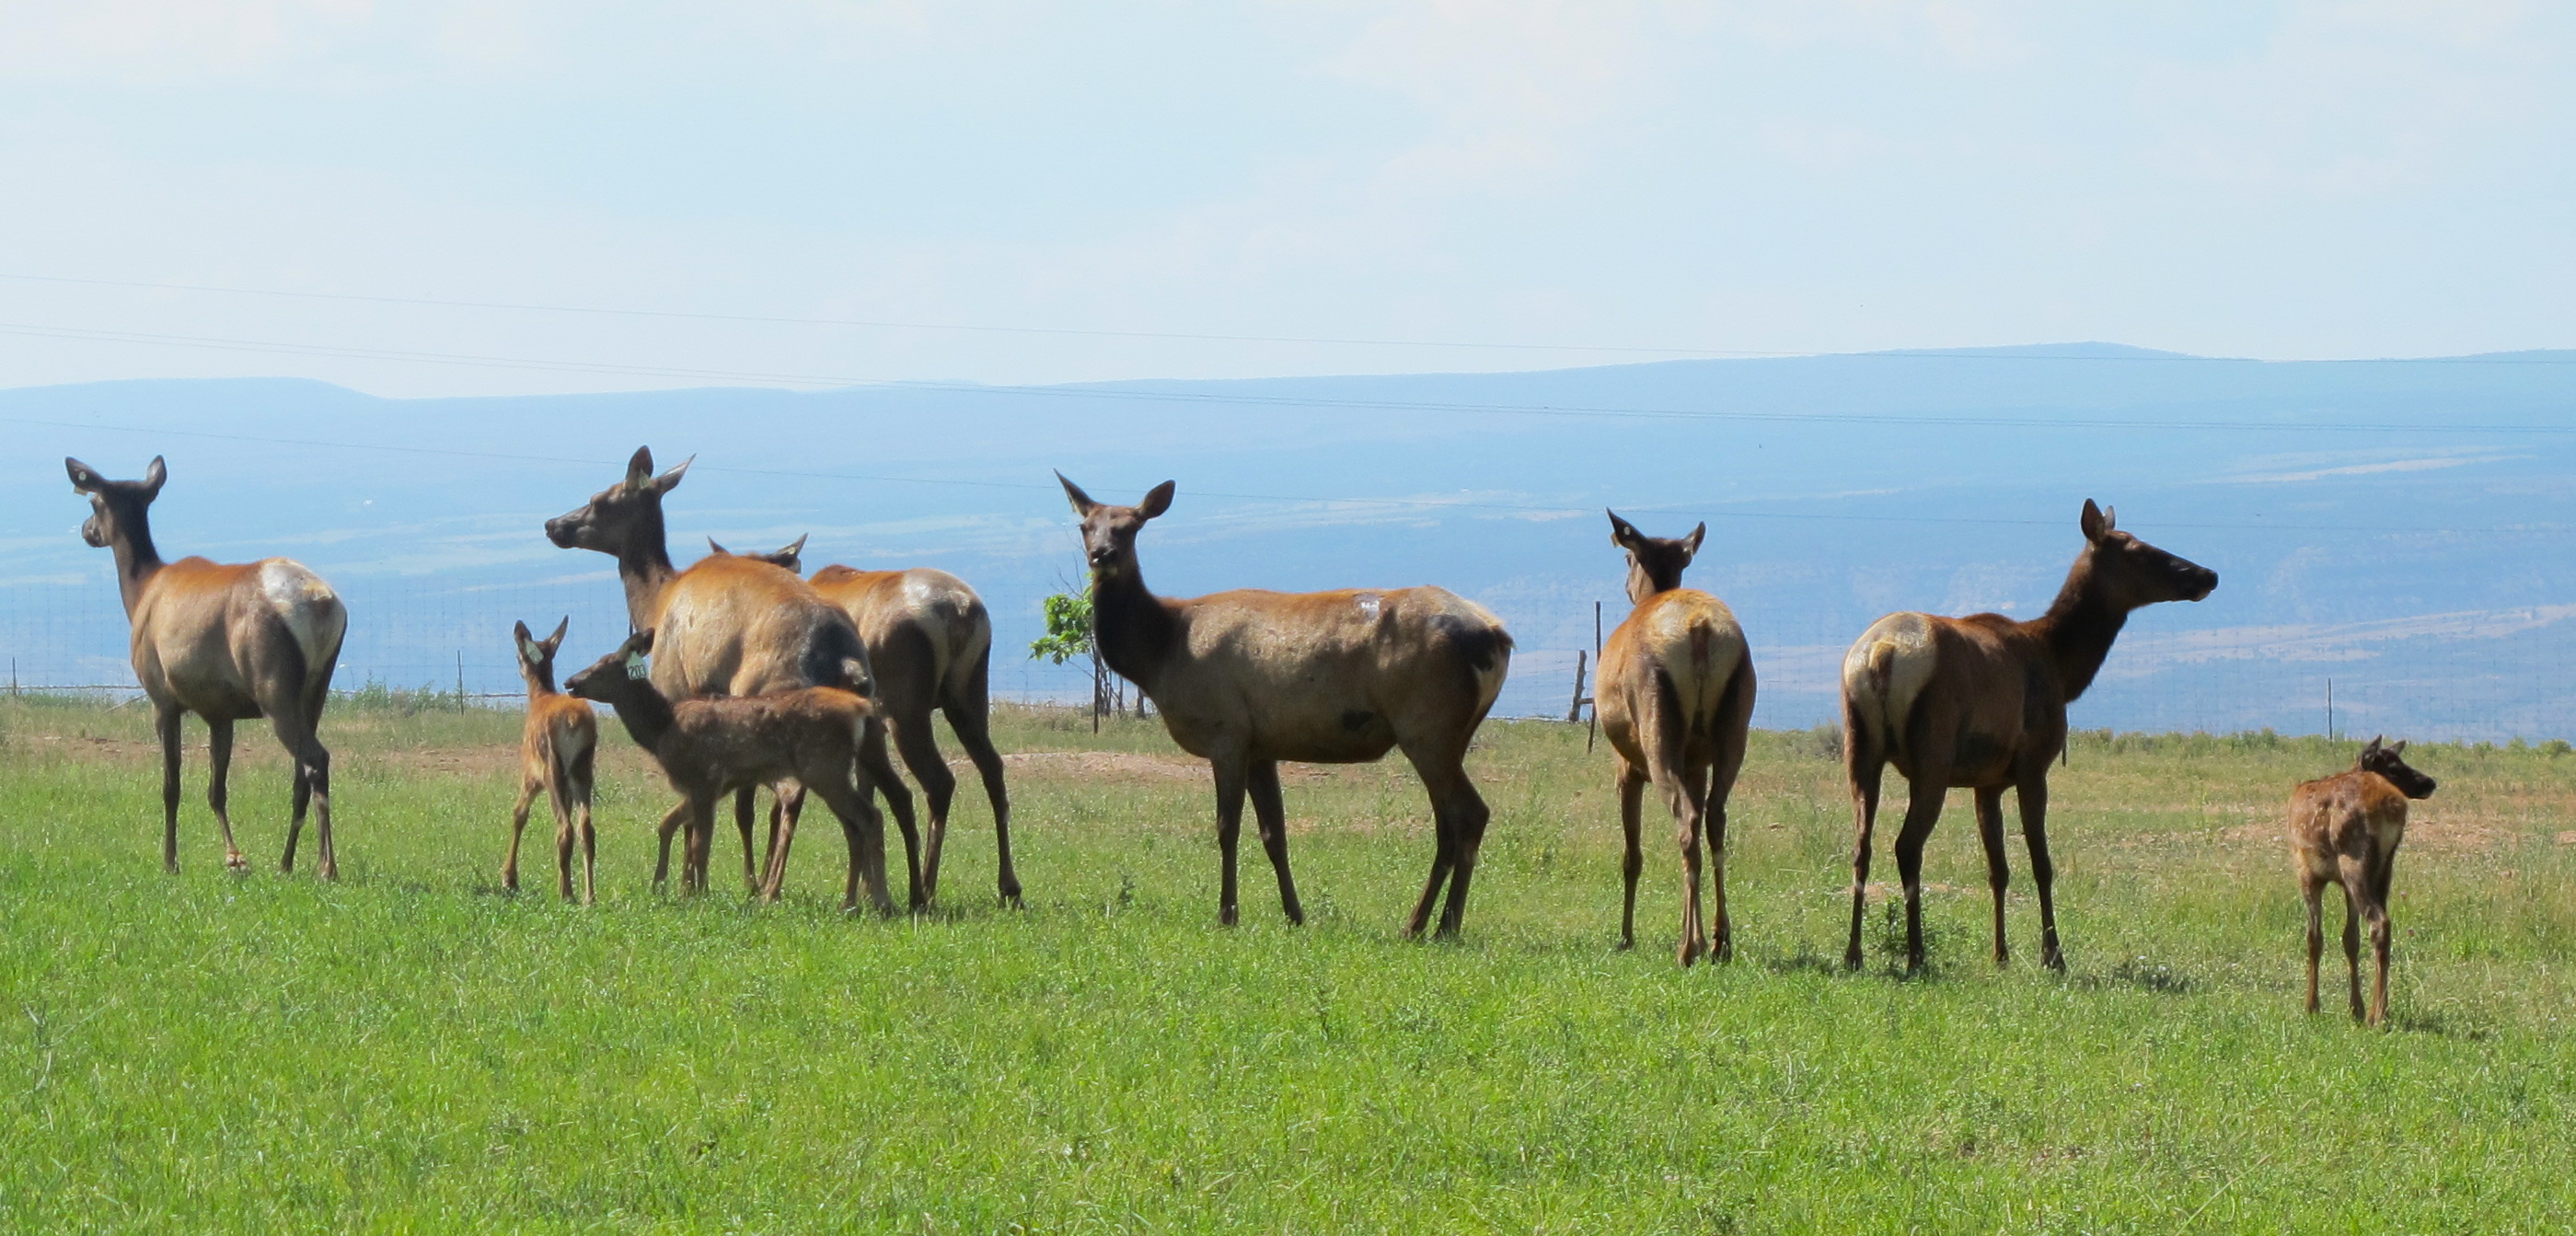 Elk herds with newly-born calves. Photo by Marla Norman.